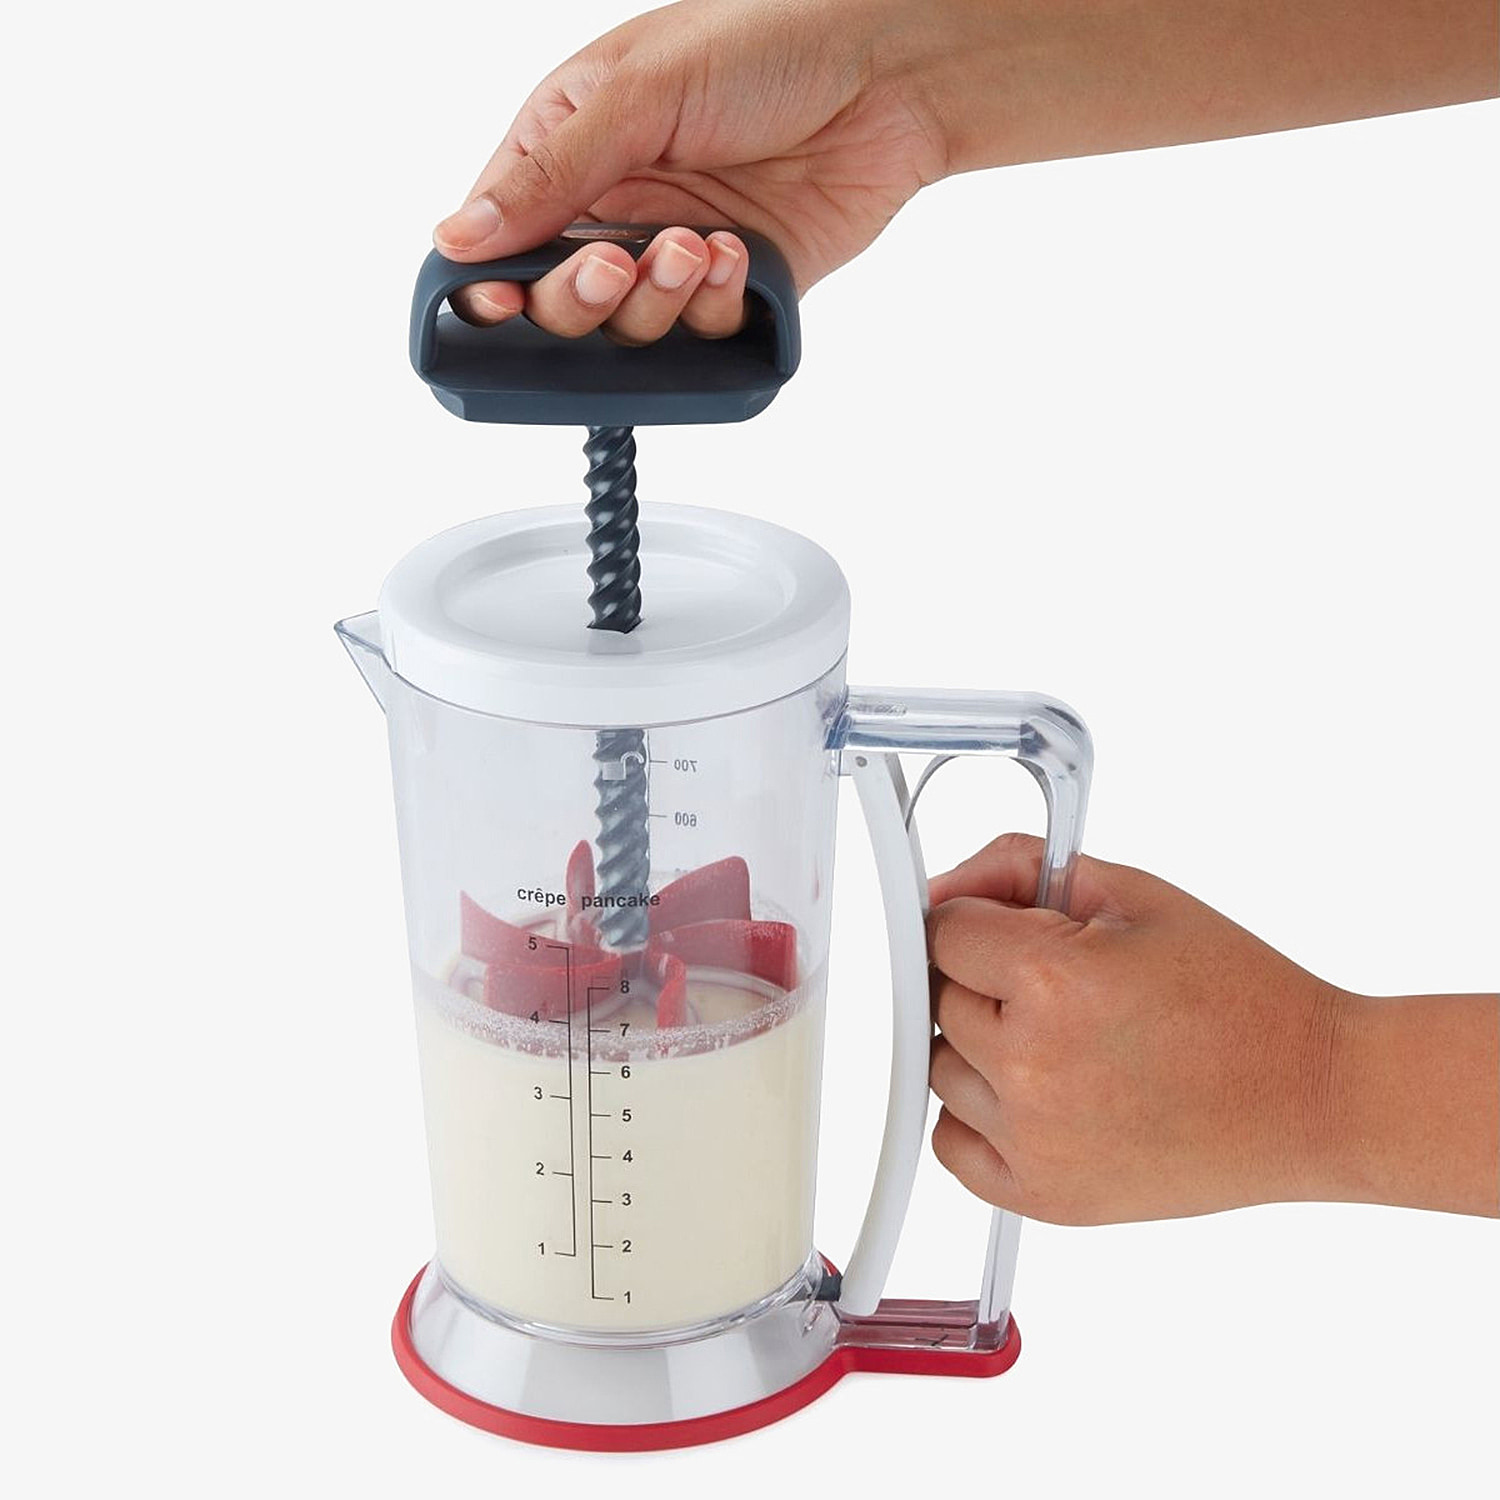 Food-Processor-and-Blender-Size-1x1x1-cm-Clear